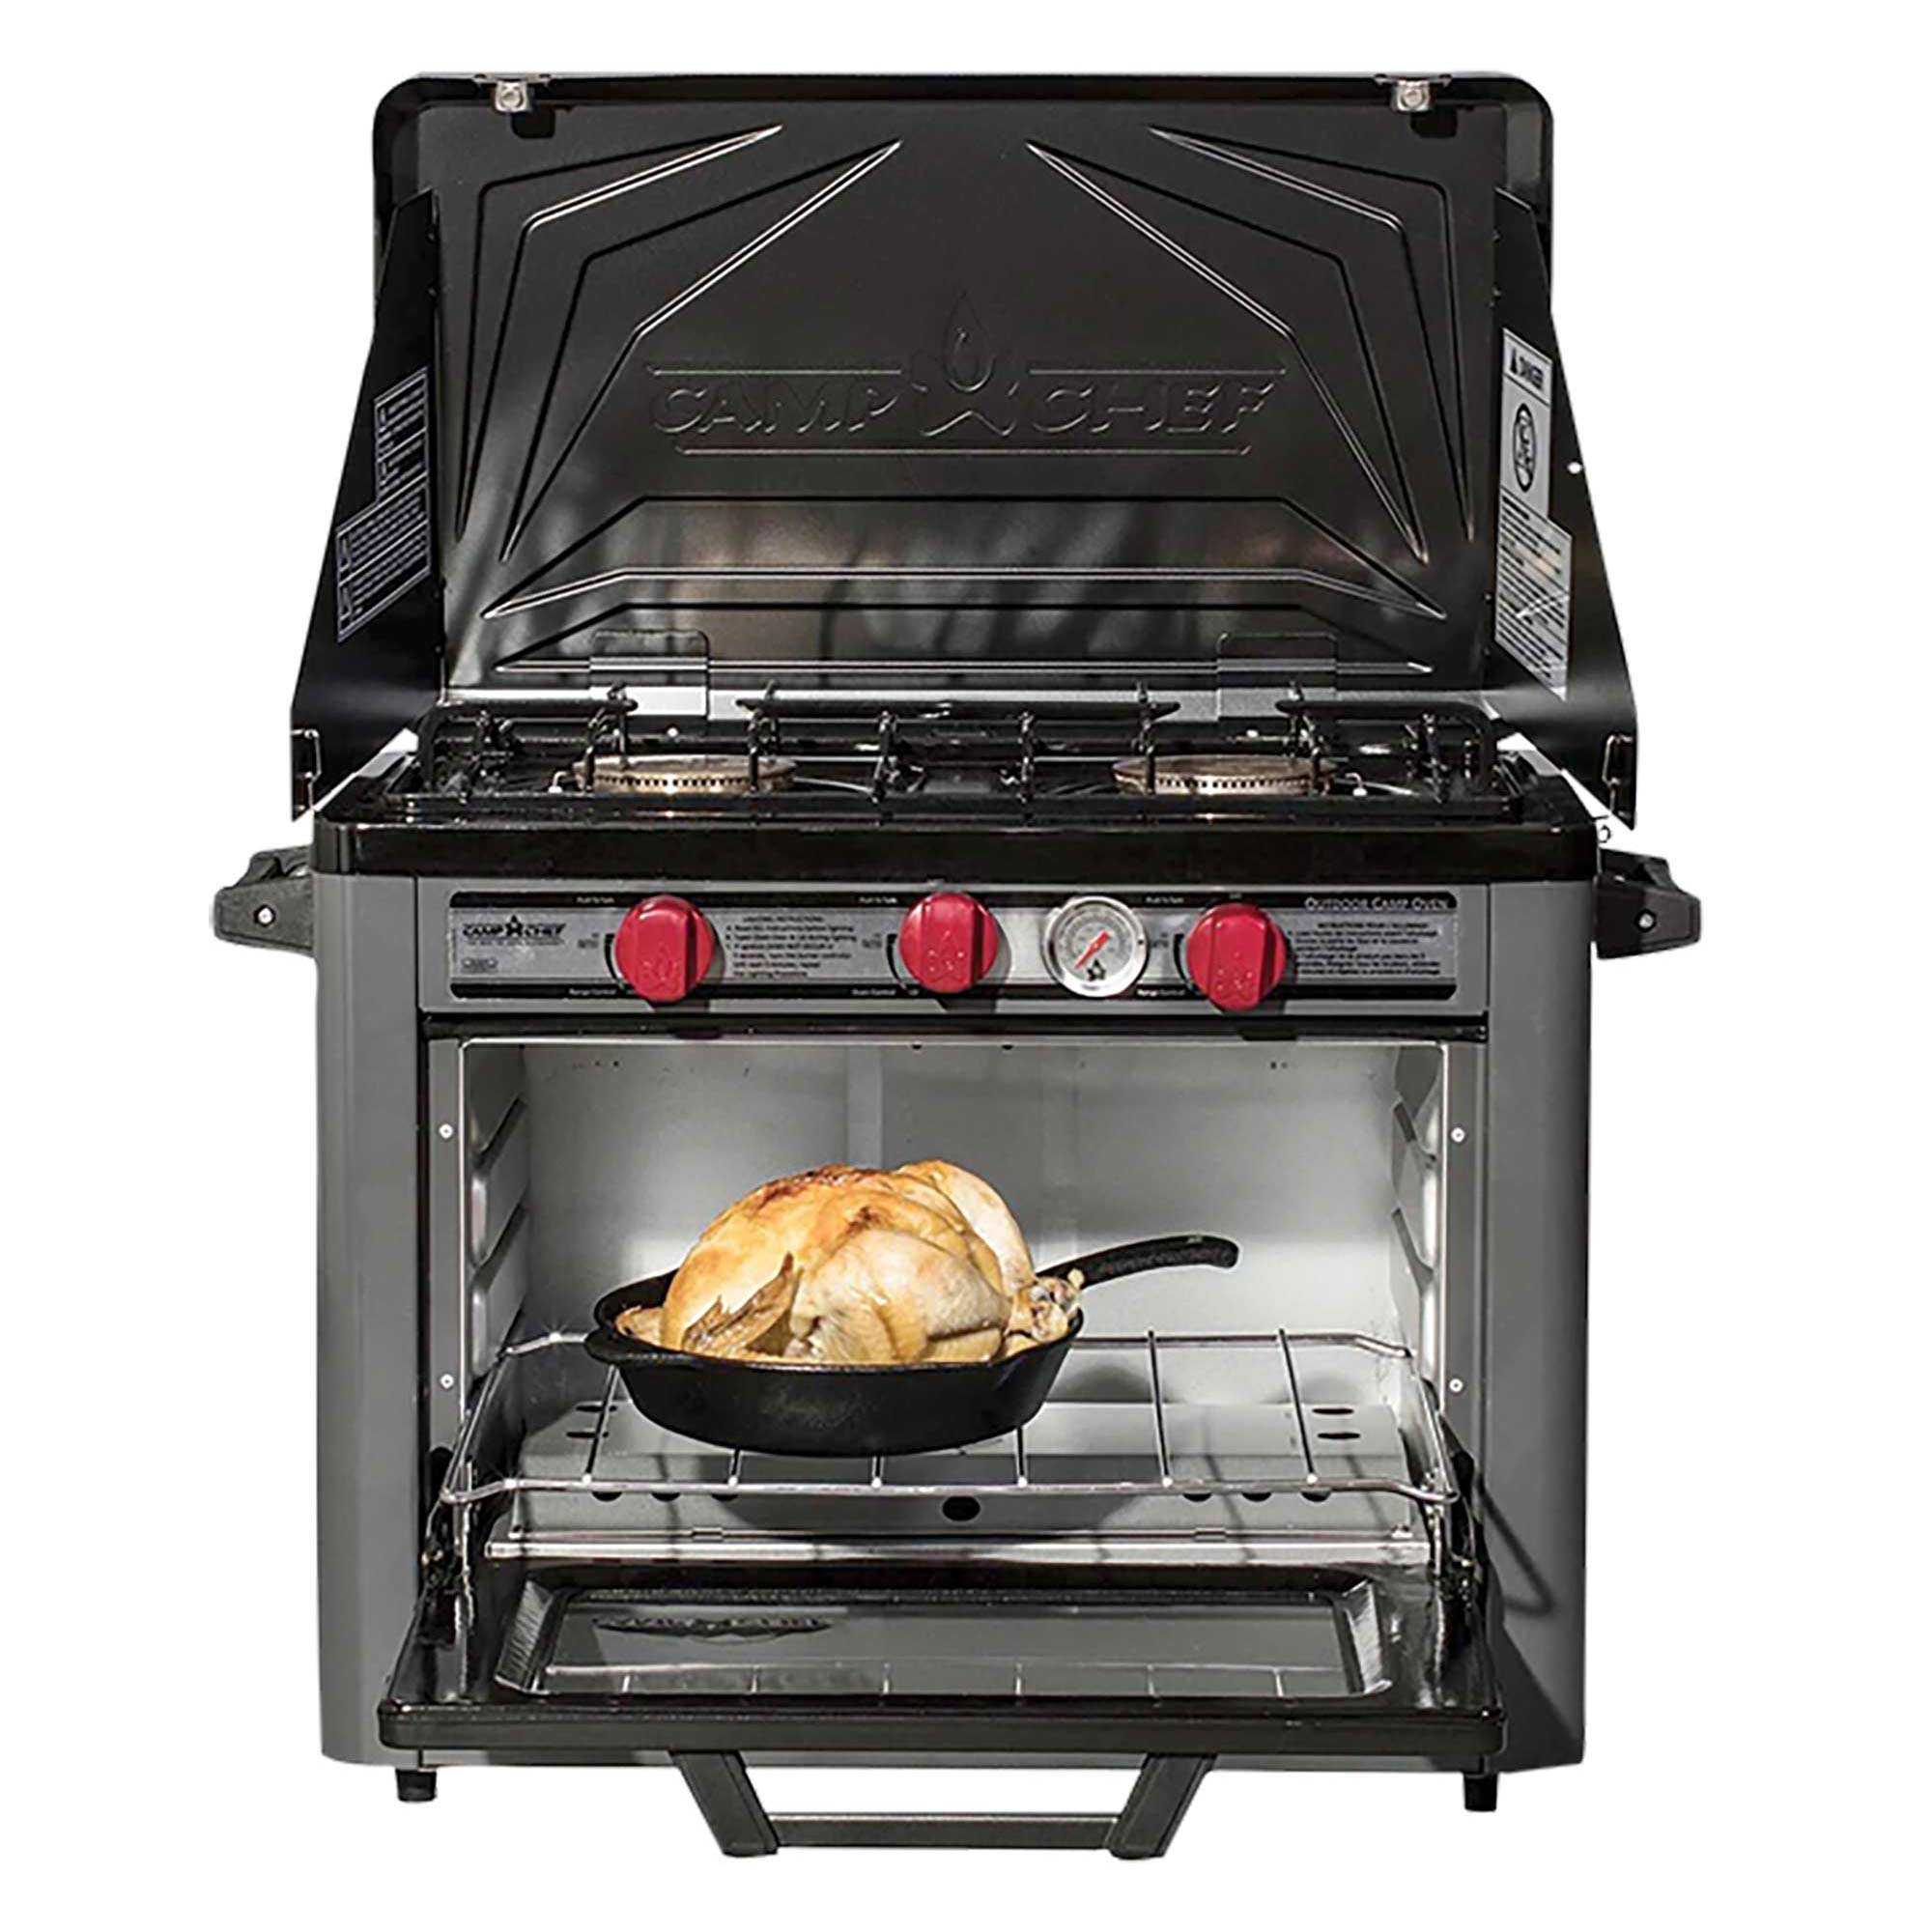 Camp Chef Outdoor Camp Oven